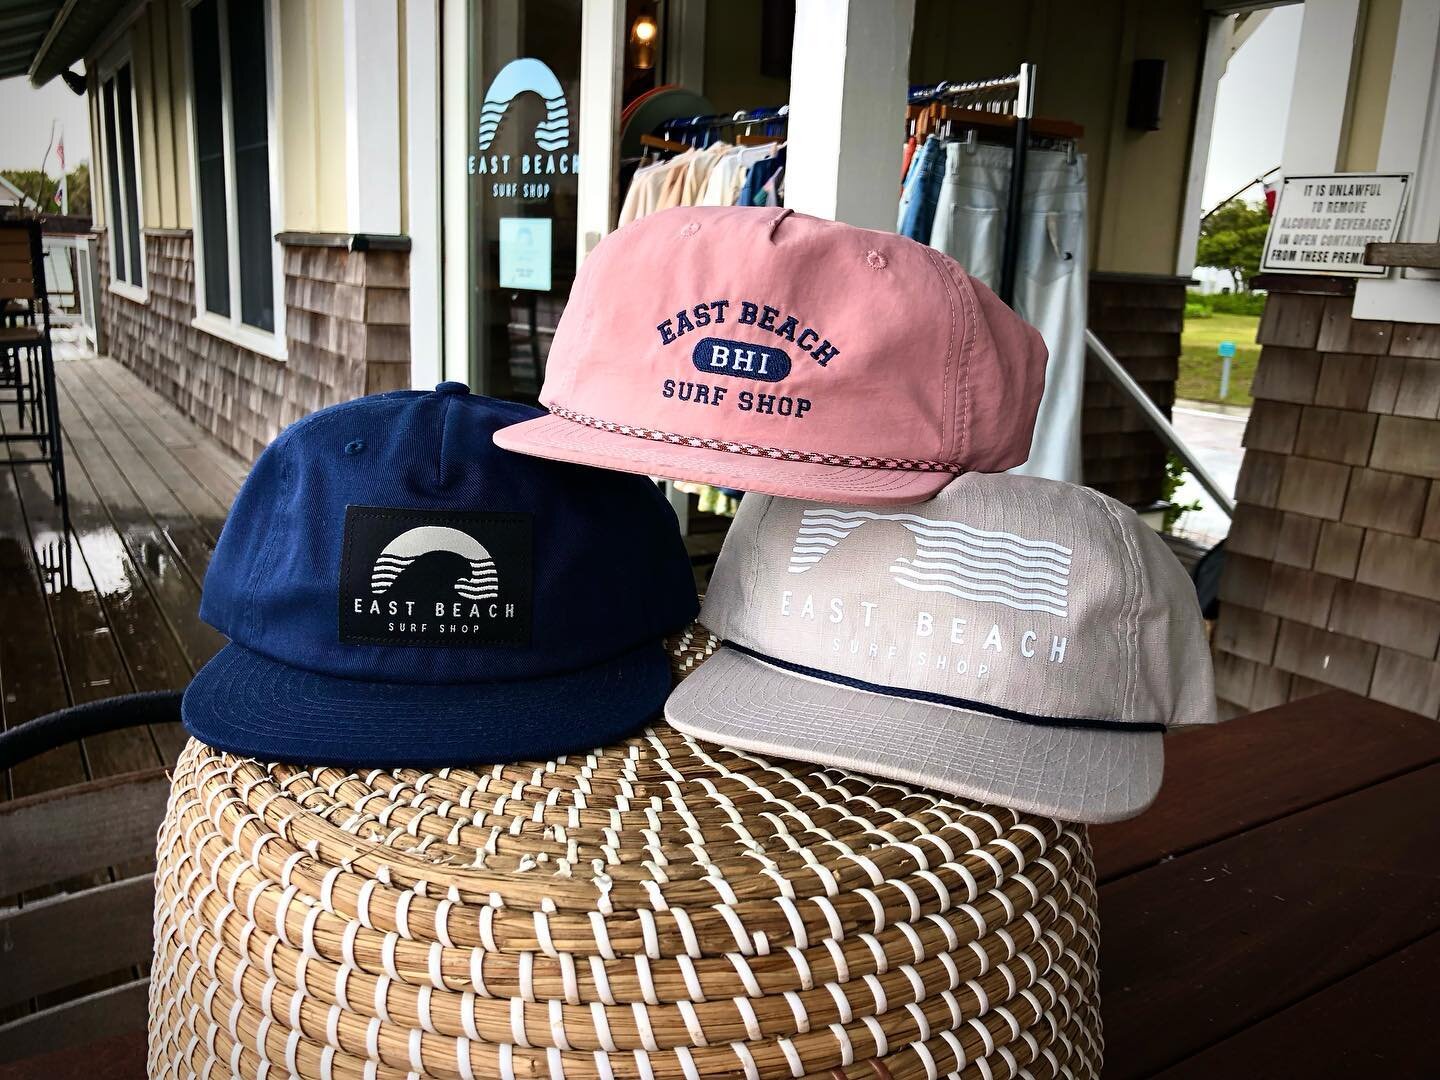 The rain is on its way out, and you know what that means! ☀️☀️SUN☀️☀️ 
.
.
.
Be sure to come check out our new hat selection from the @eastbeachsurfshop brand and multiple others. Get stylin&rsquo; for the coming months people! We got you covered🤙🏽